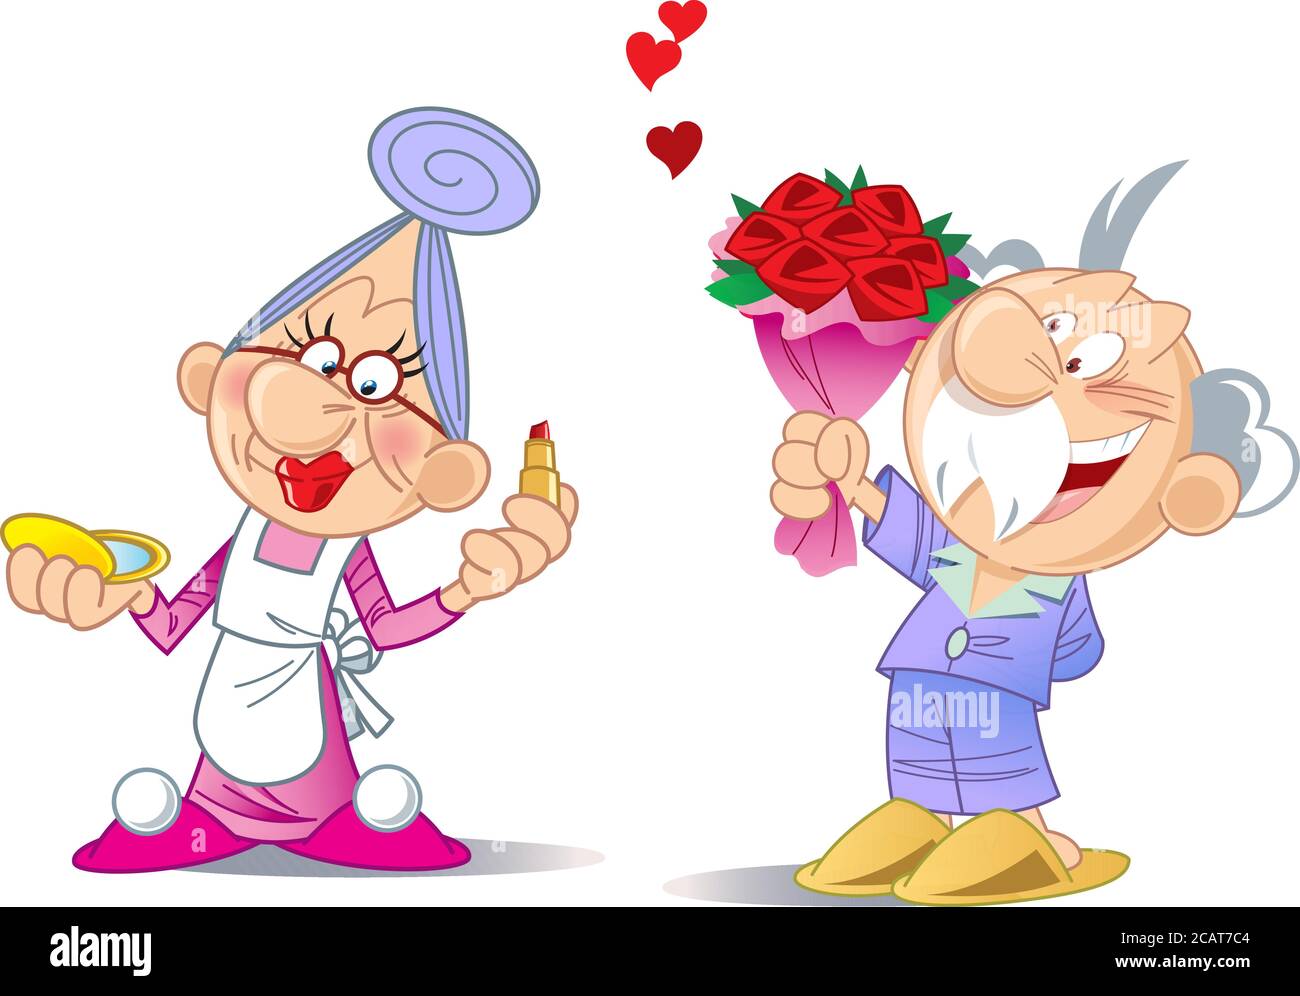 The vector illustration depicts an elderly active couple in a cartoon style. Grandma does makeup and grandpa gives her a bouquet of flowers Stock Vector